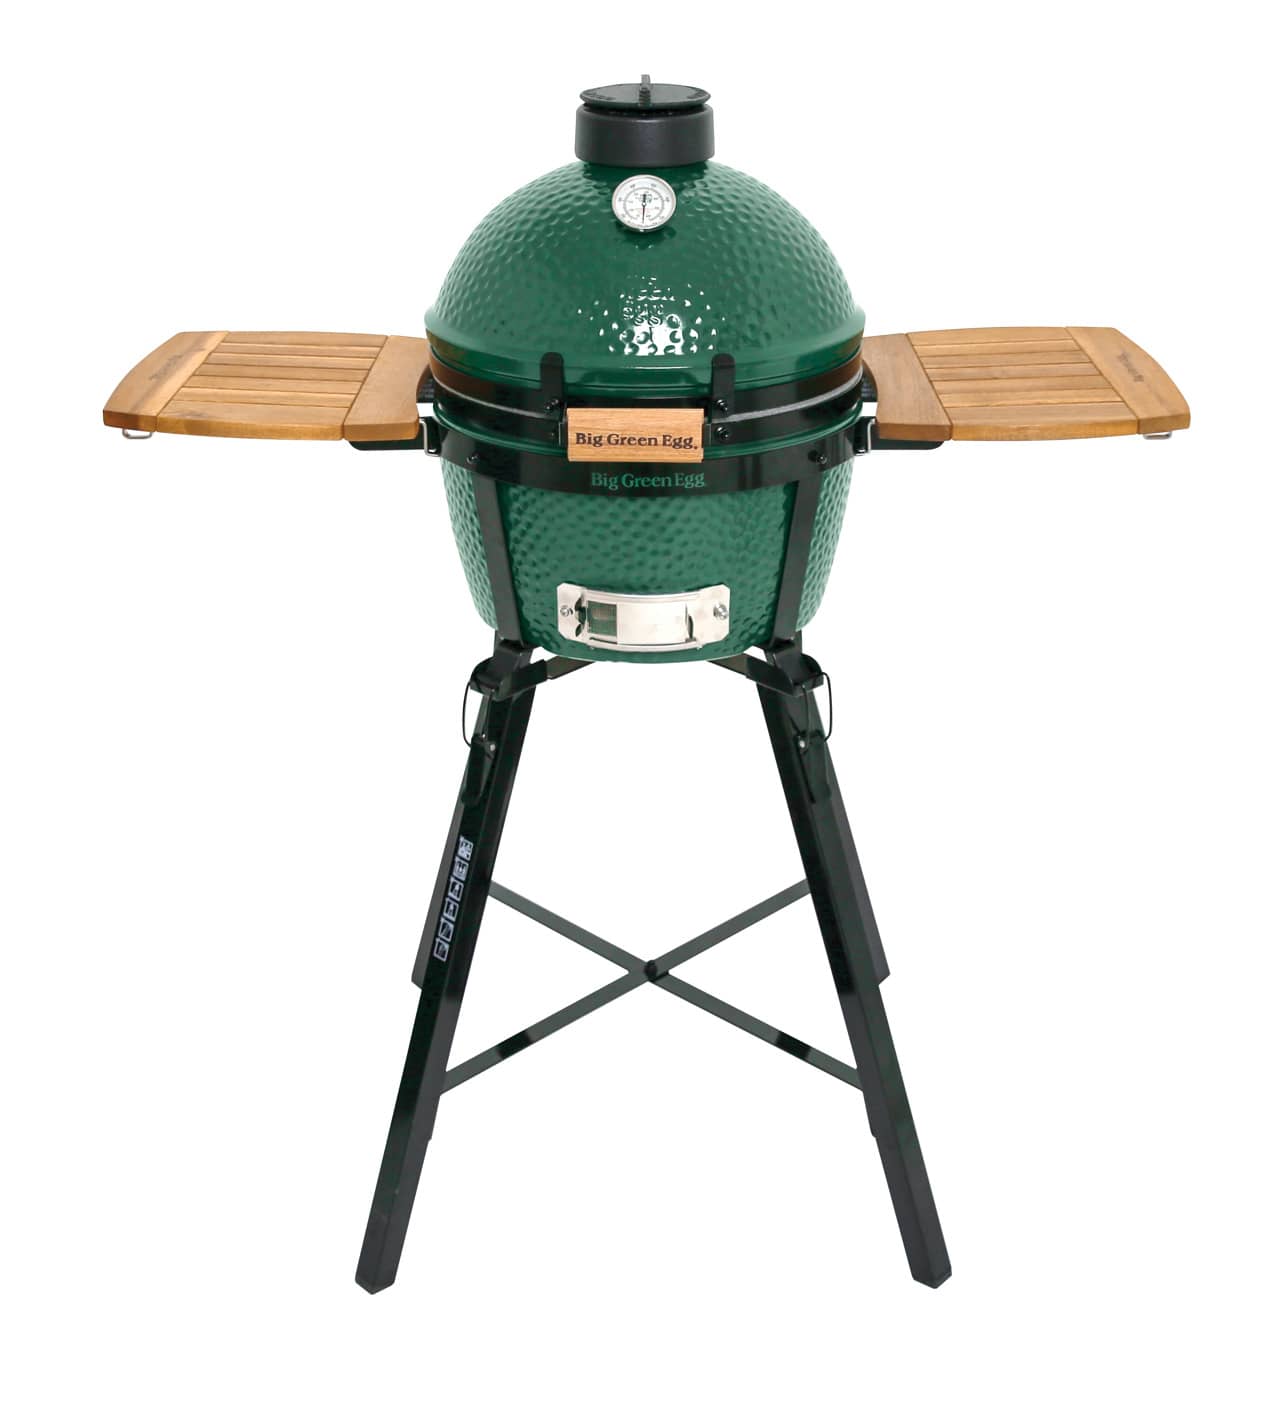 A portable Big Green Egg ceramic cooking system